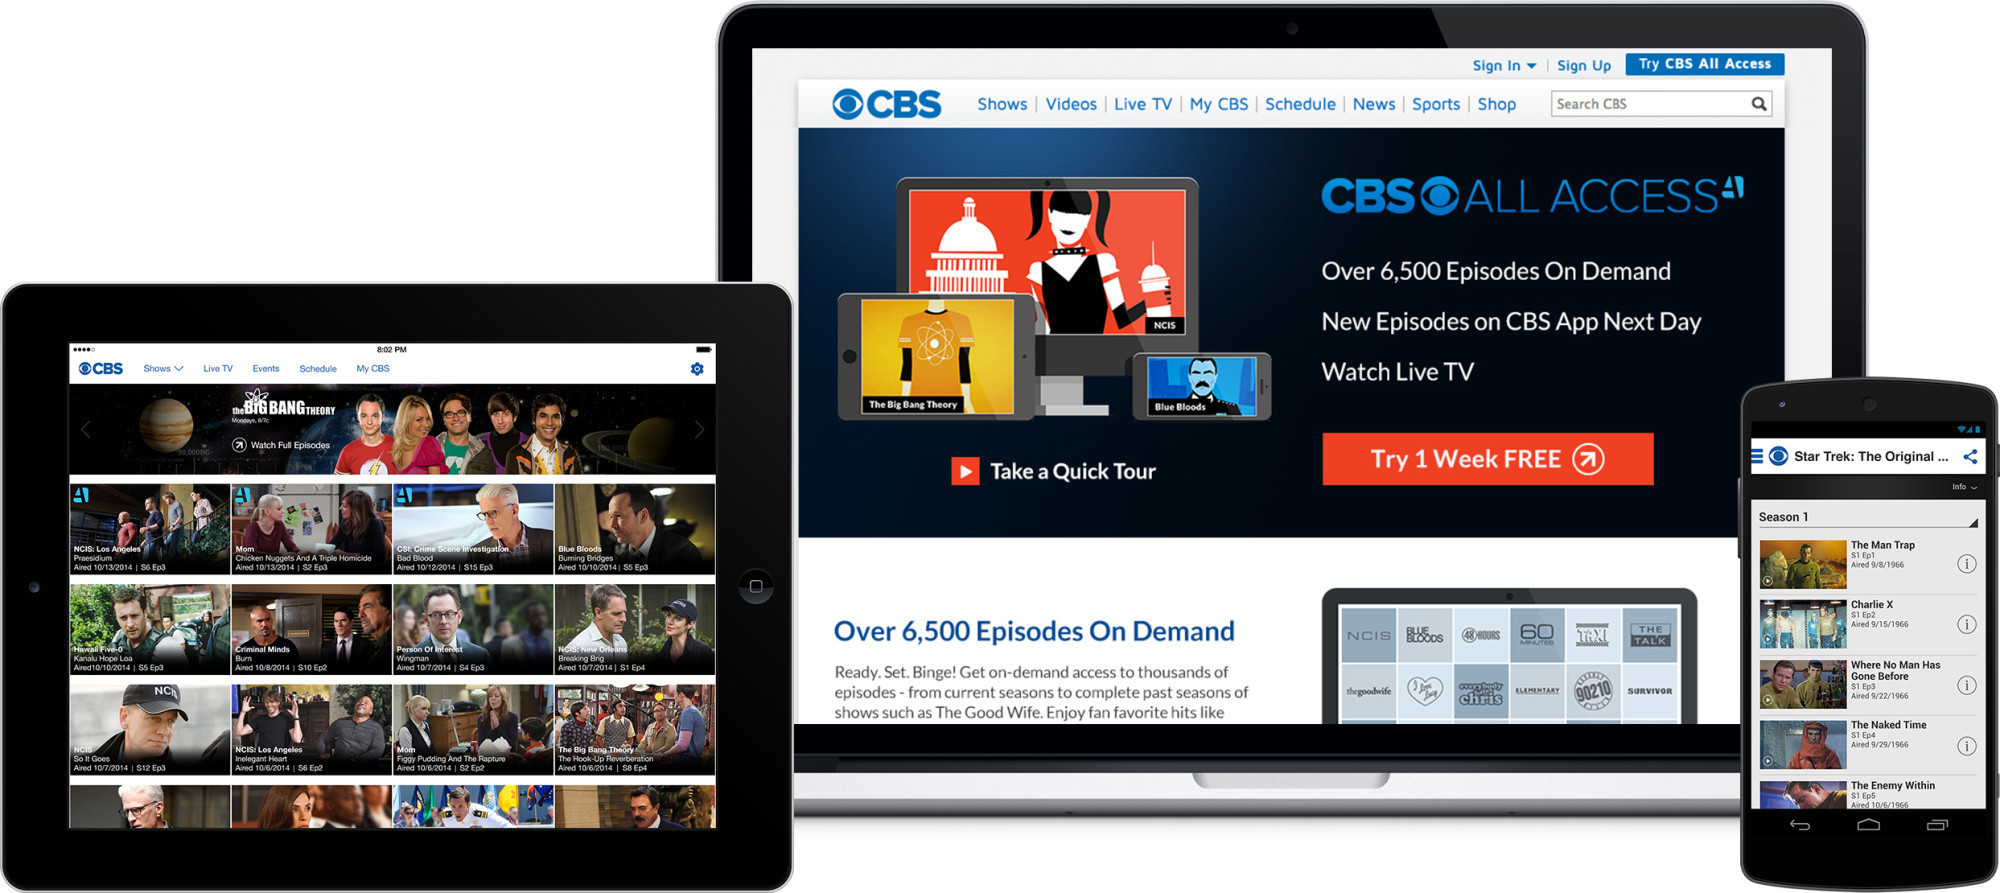 CBS joins HBO in chase for cord-cutters - LA Times